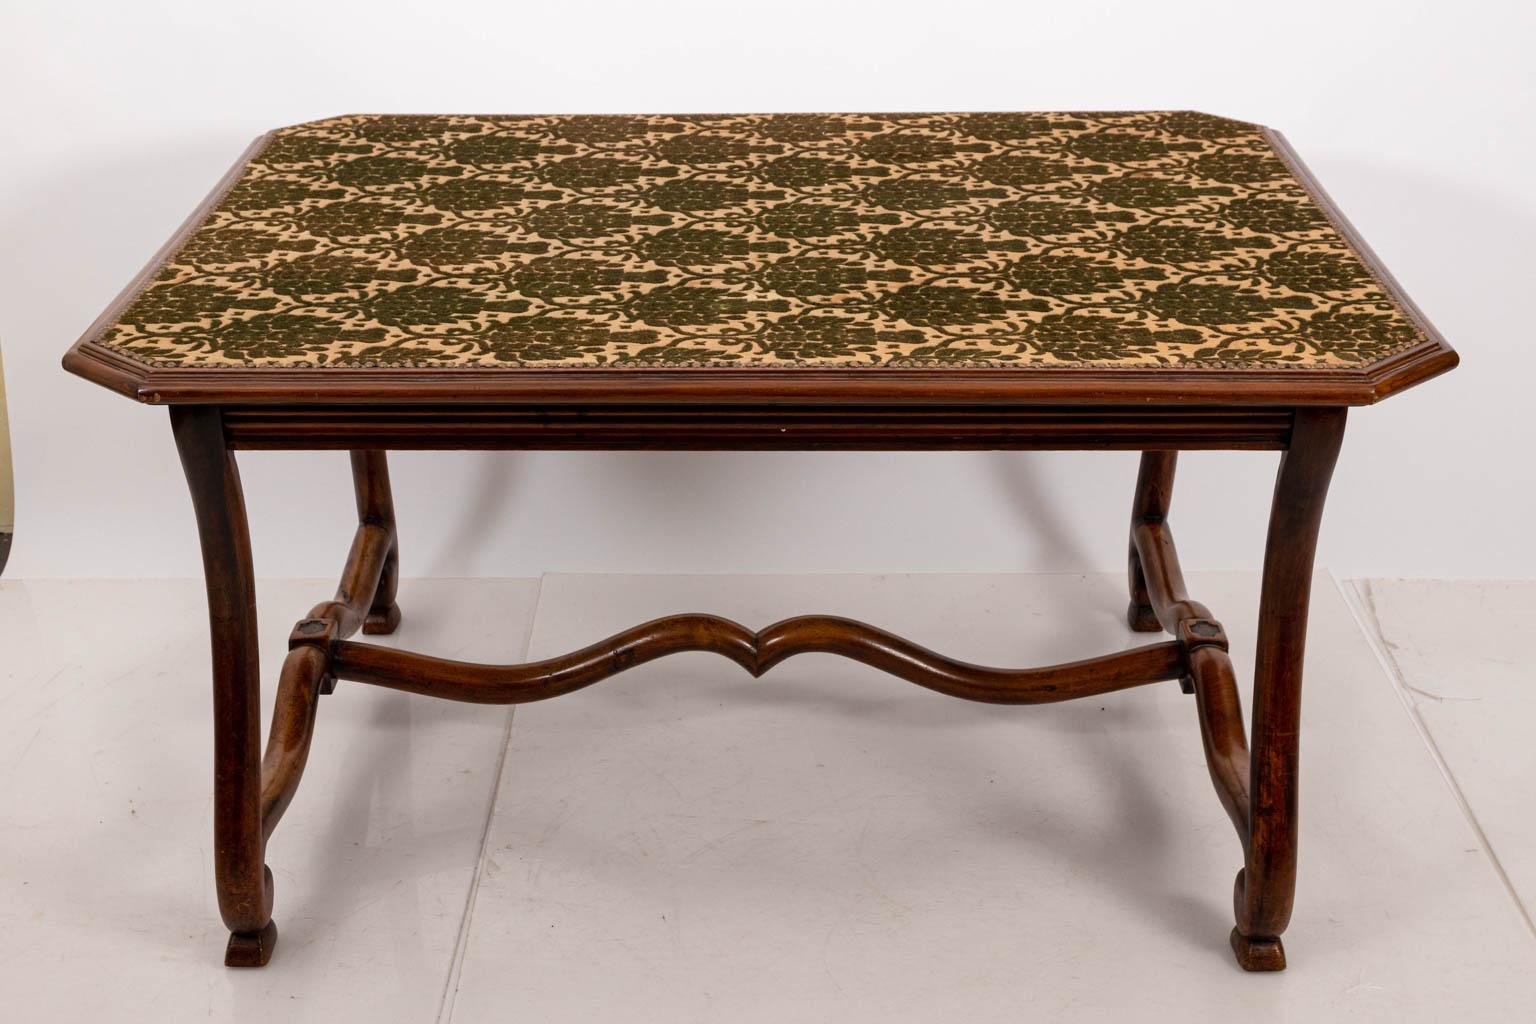 Walnut library table in the French country style, circa early 20th century. The piece also features upholstered top in antique Grillage while the fabric is in the William Morris style with nail head trim. The base also features scrolled legs and